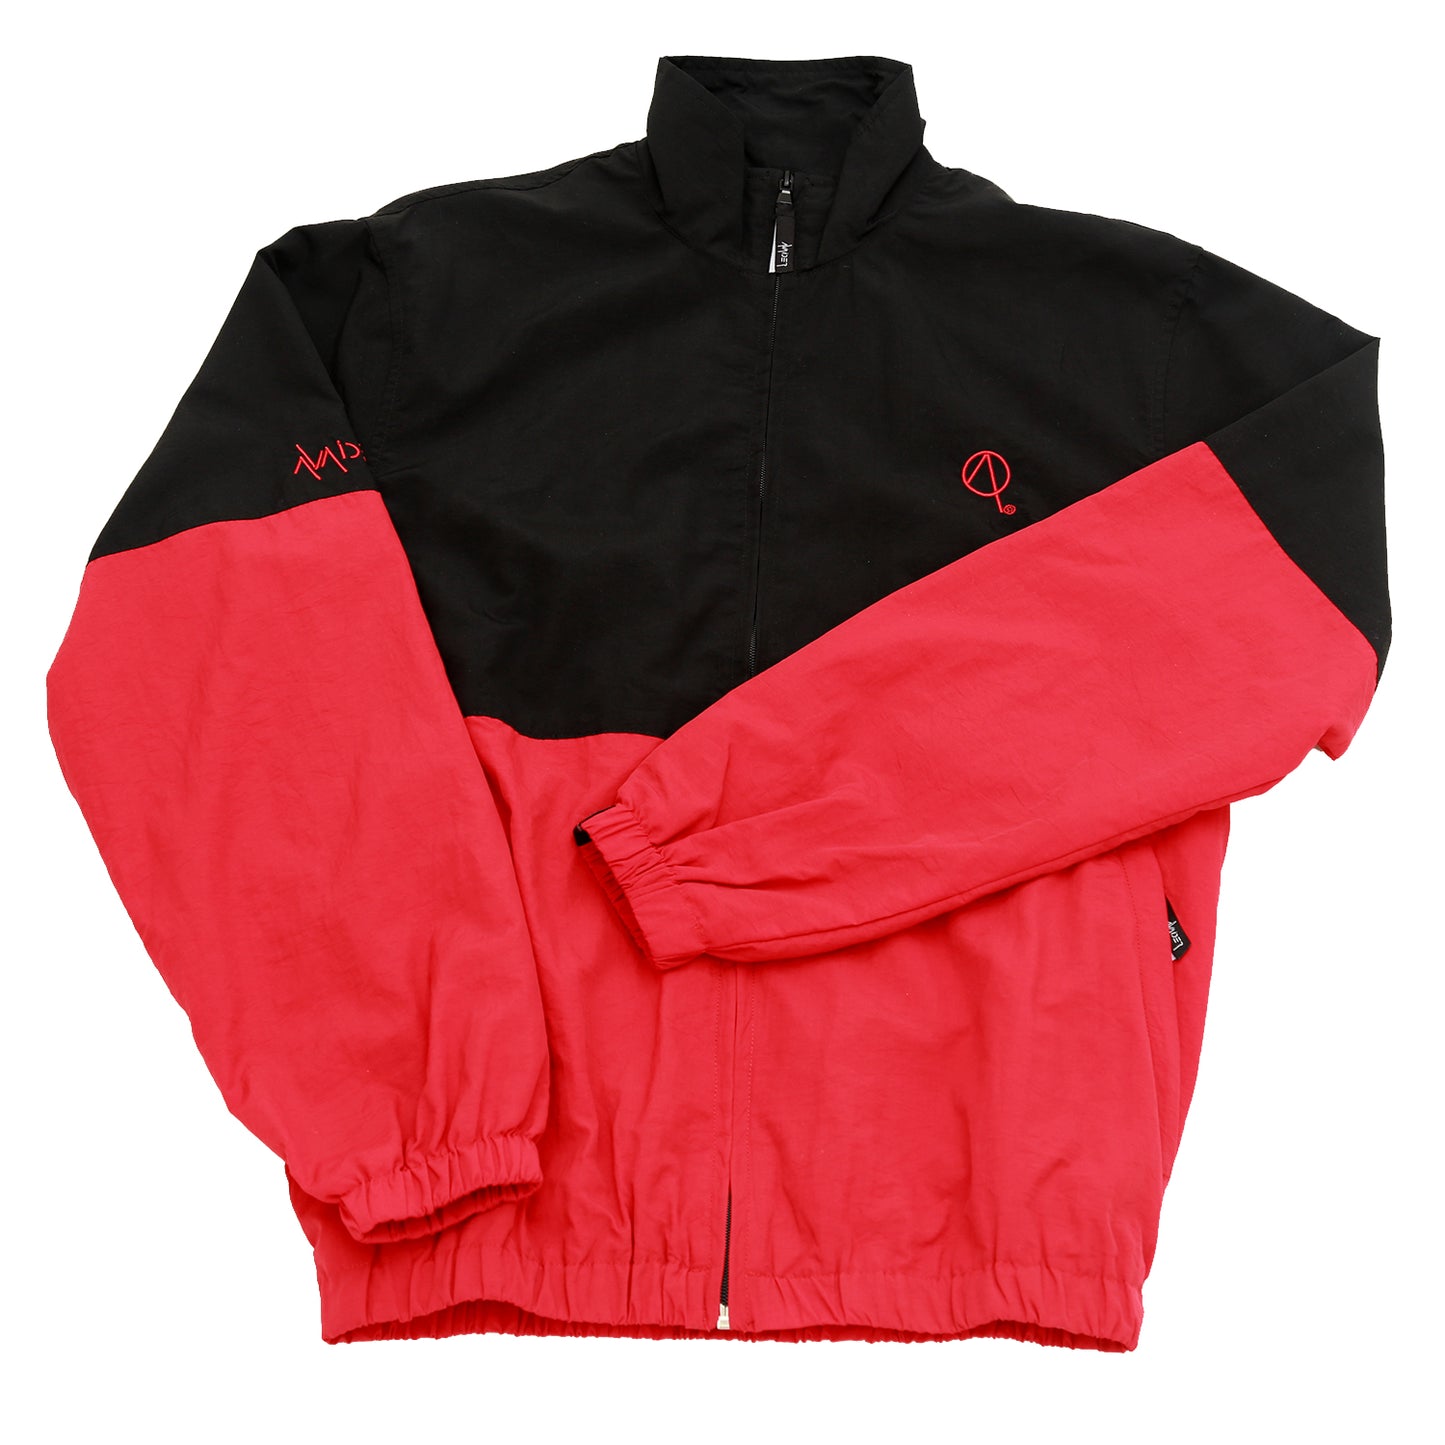 BASECAMP WOVEN TRACK TOP IN BLACK AND RED